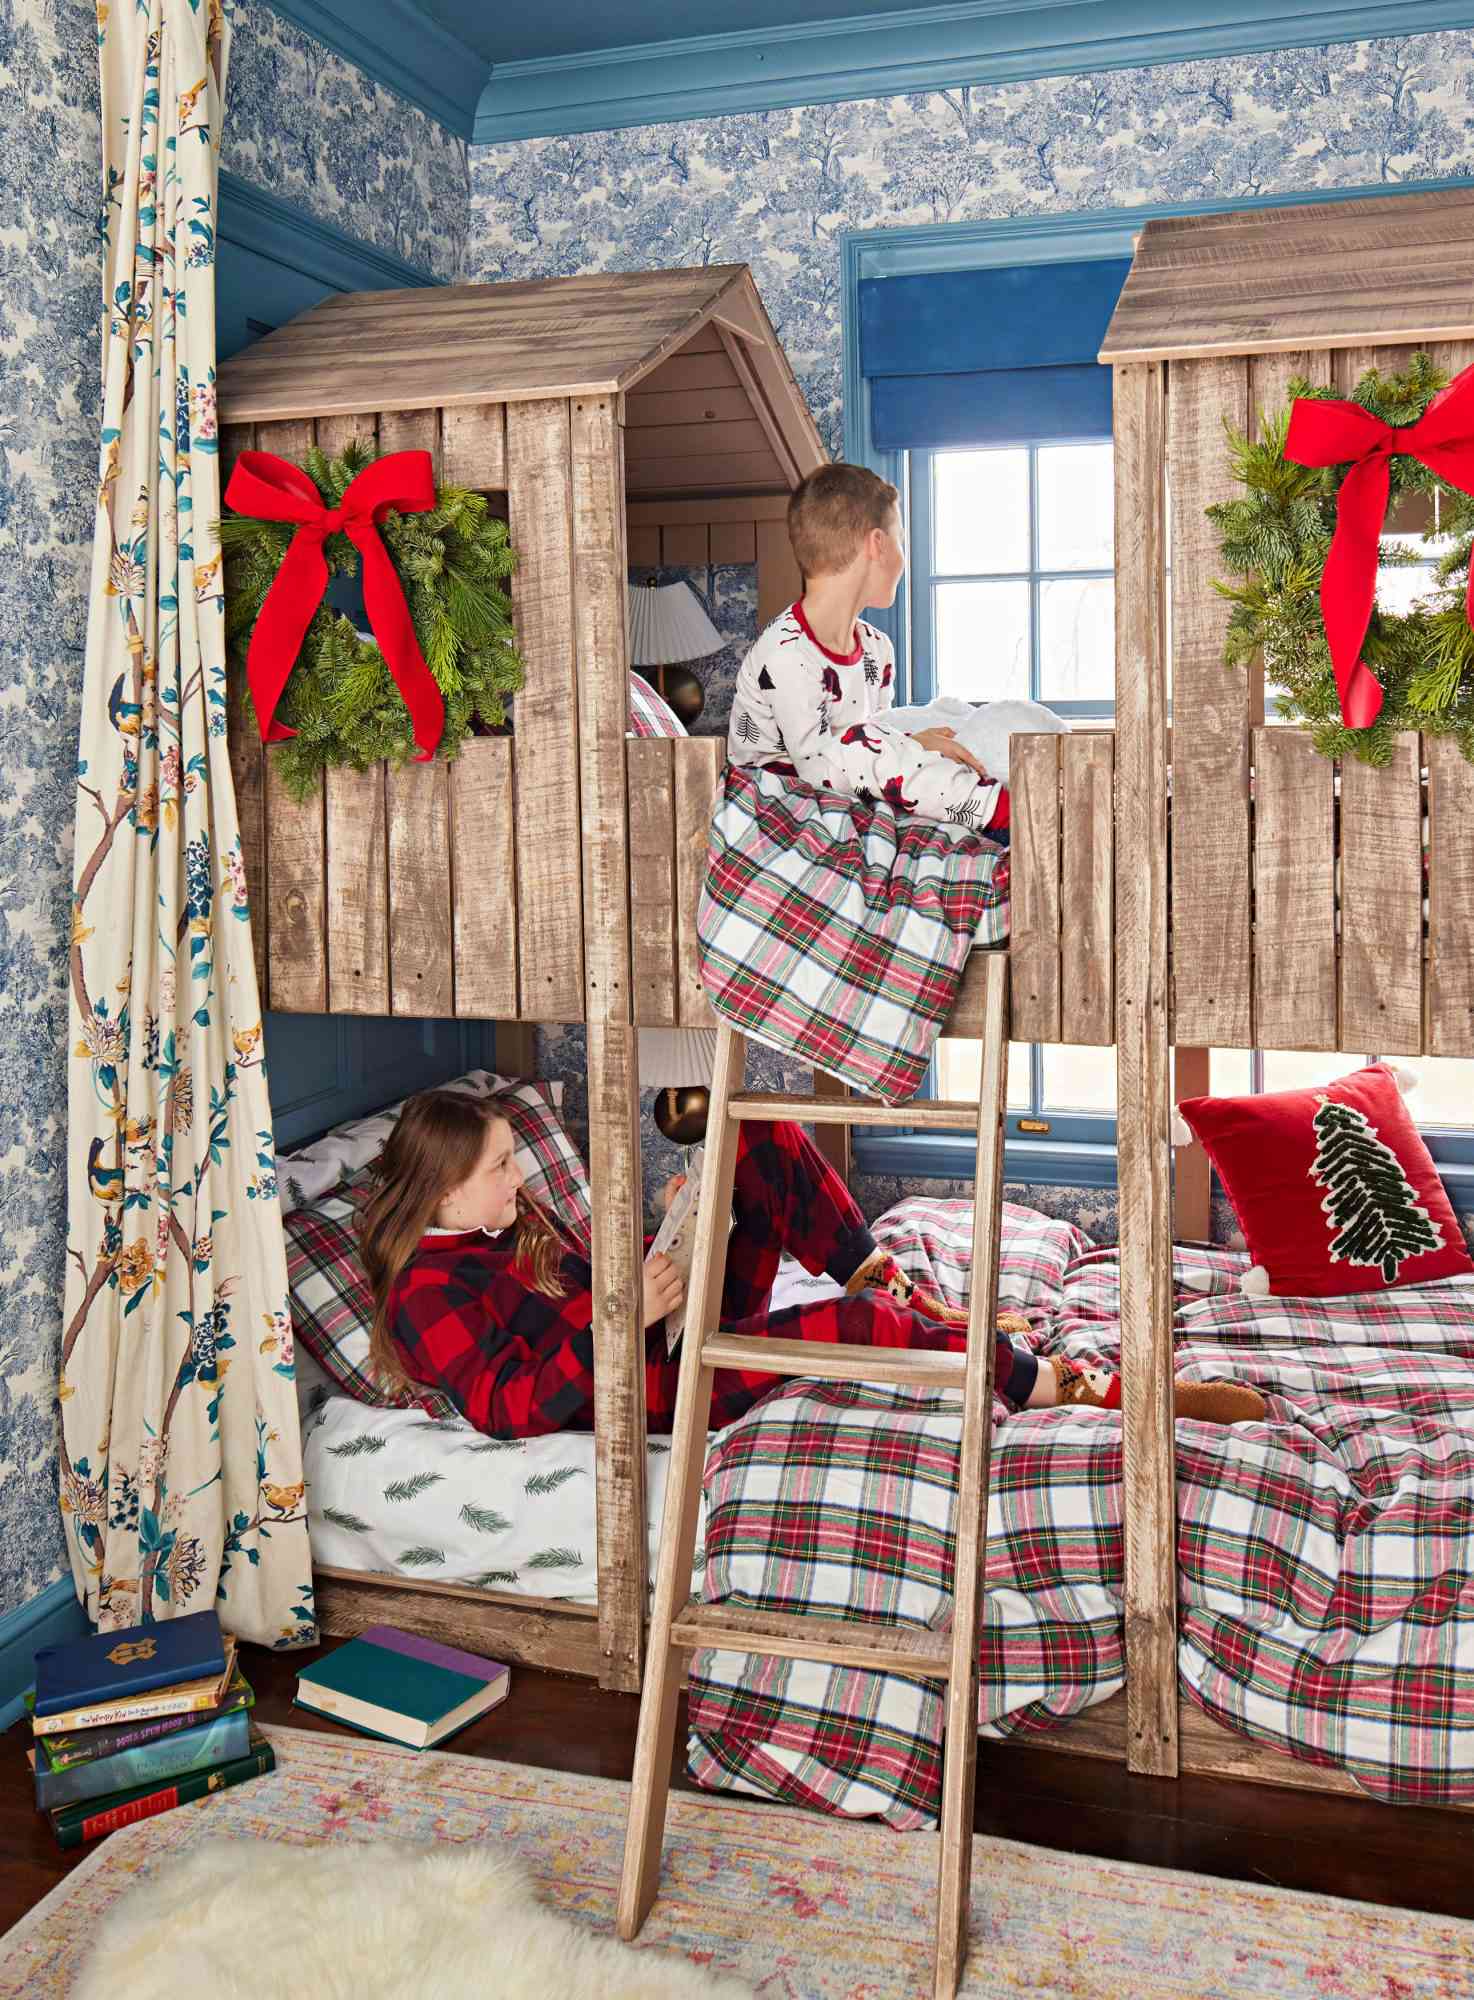 Children in bunk beds decorated for the holidays